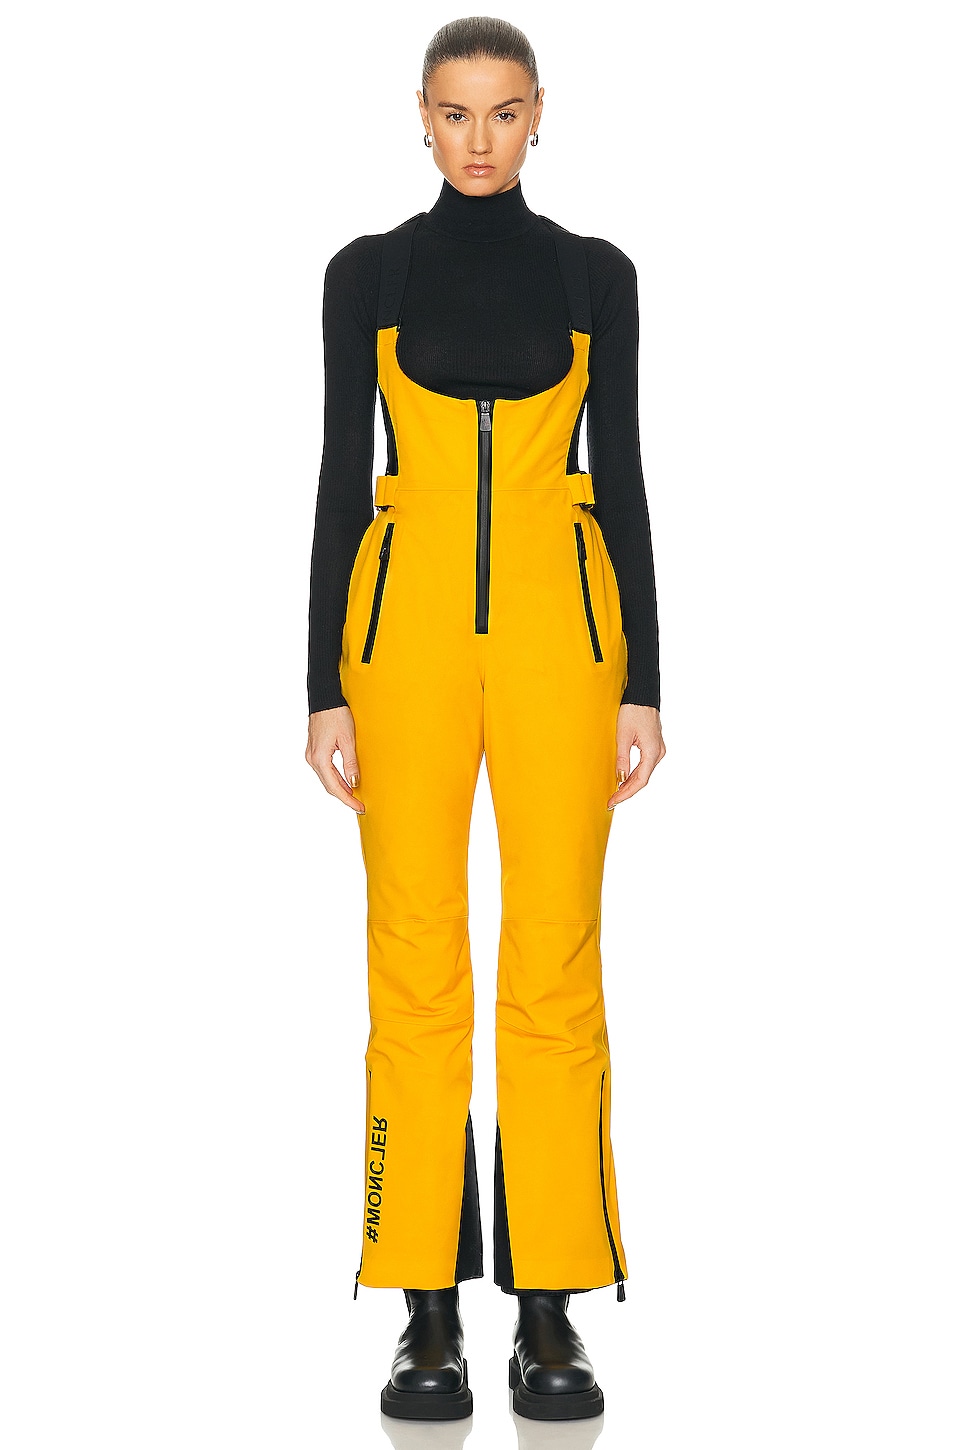 Image 1 of Moncler Grenoble Ski Suit in Yellow